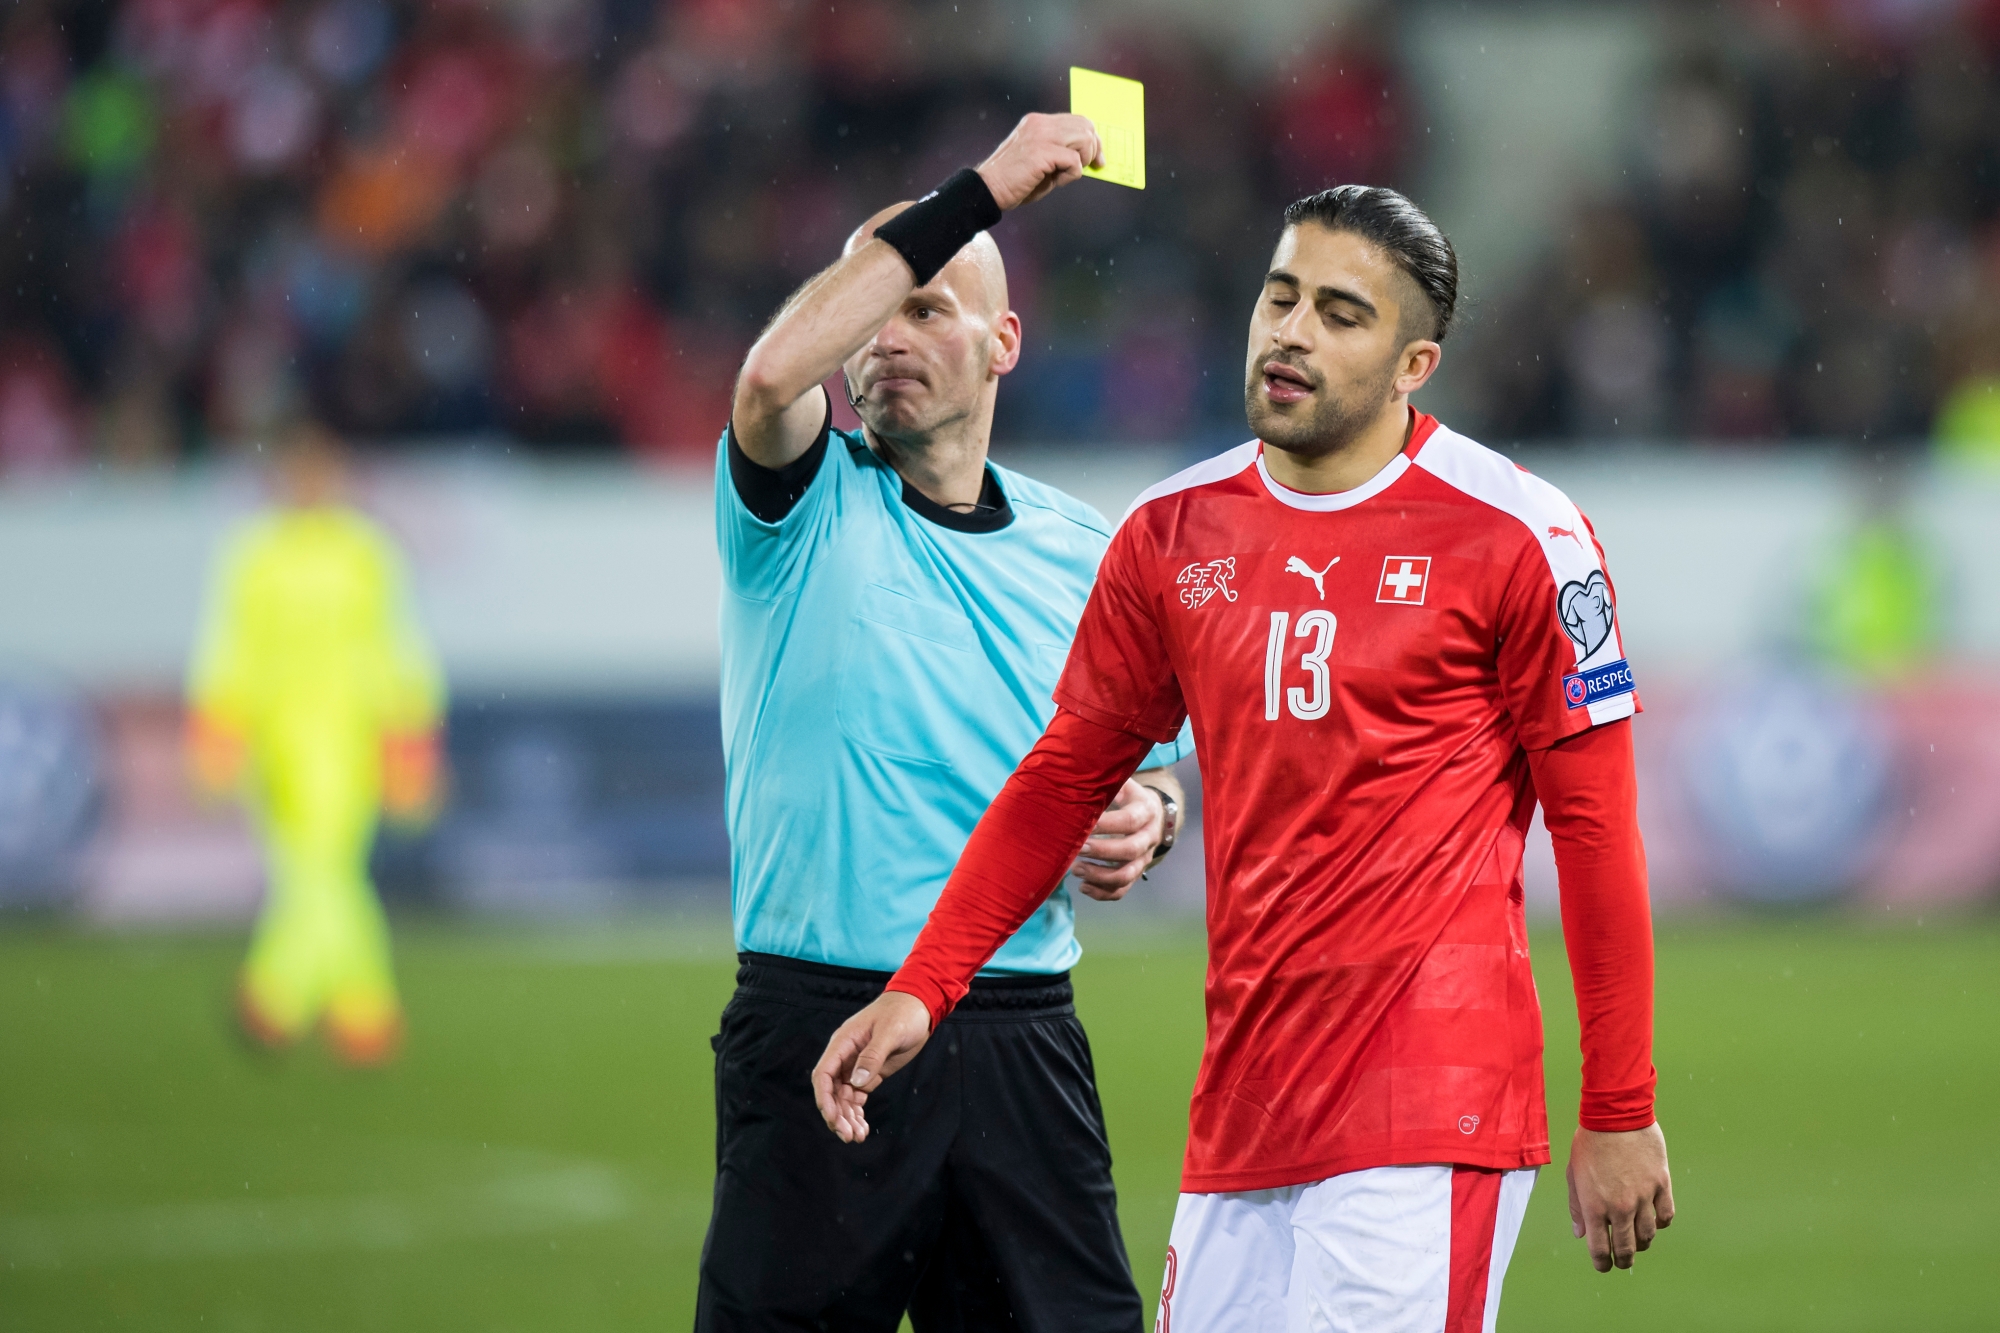 Belgium referee Sebastien Delferiere, left, gives a yellow card to Swiss defender Ricardo Rodriguez, right, during the 2018 Fifa World Cup group B qualification soccer match between Switzerland and Faroe Islands at the Swissporarena in Lucerne, Switzerland, Sunday, November 13, 2016. (KEYSTONE/Laurent Gillieron)rodriguez FUSSBALL WM 2018 QUALIFIKATION FUSSBALL WM 2018 CHE FRO